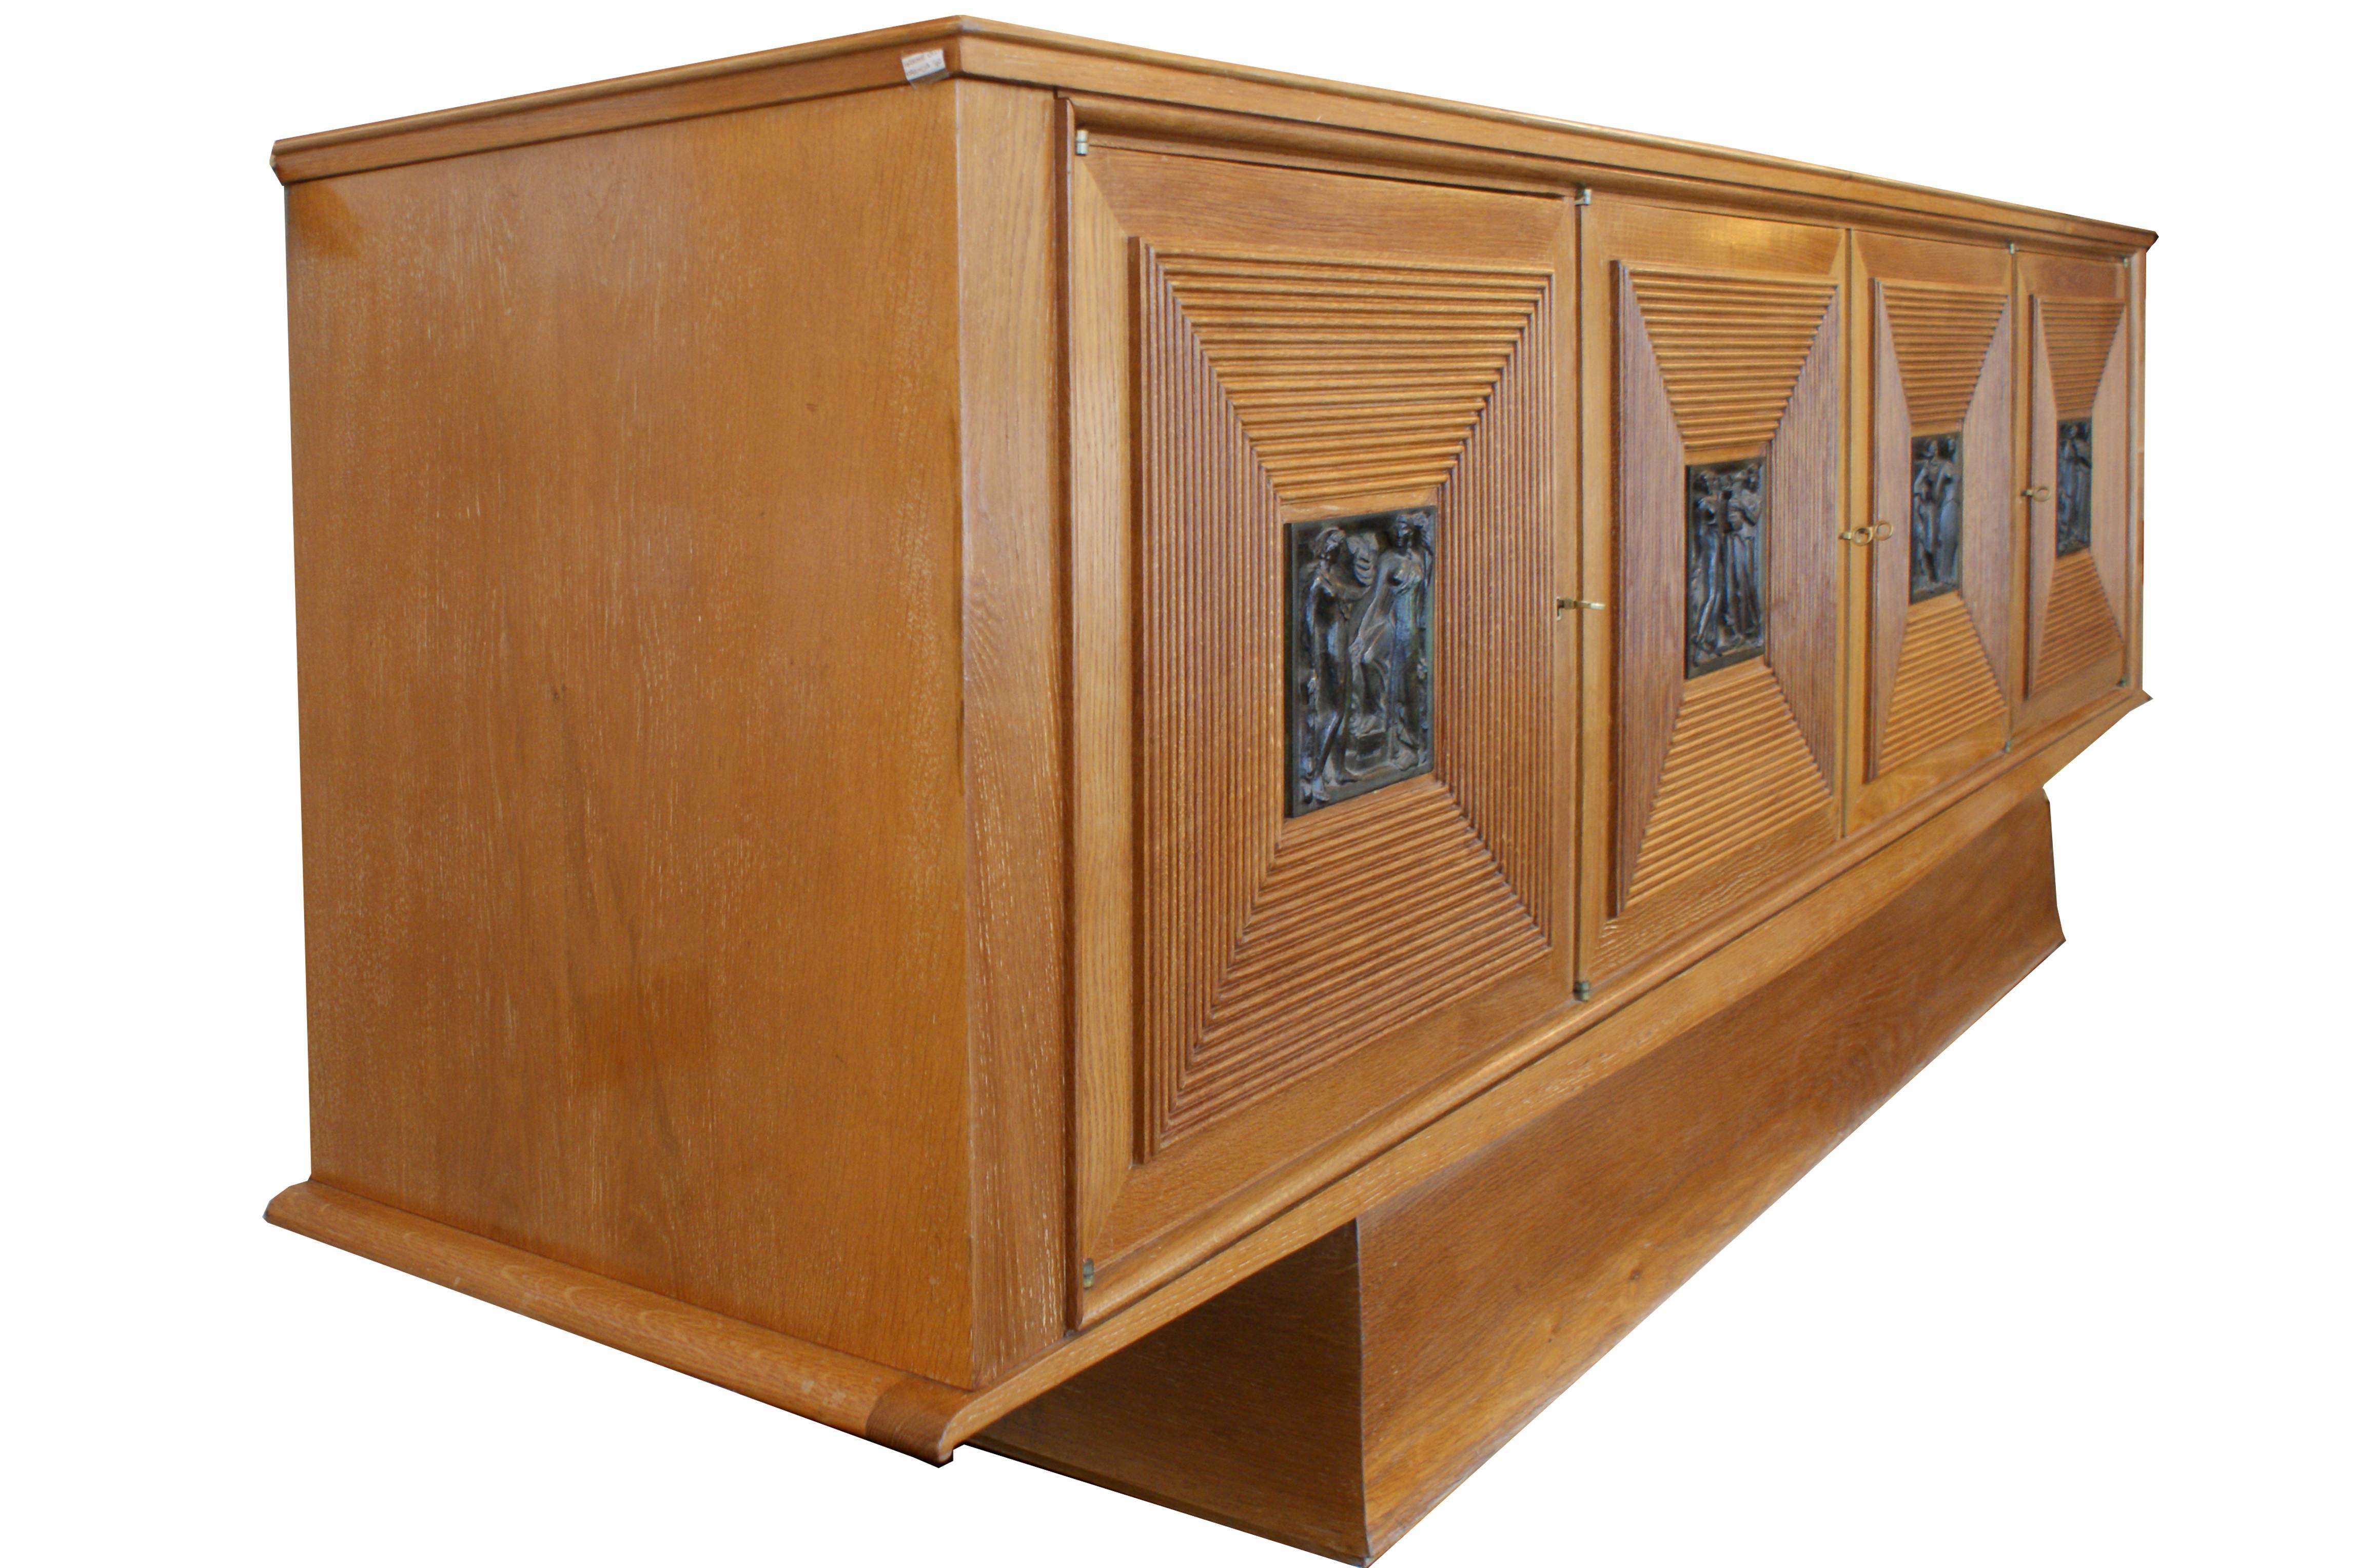 An amazing and publicated four doors cabinet in oak with squared bronze decorations by Maxime Old, France, circa 1940. Signed. Dimensions: cm 241 x 50 x 87.5 H.